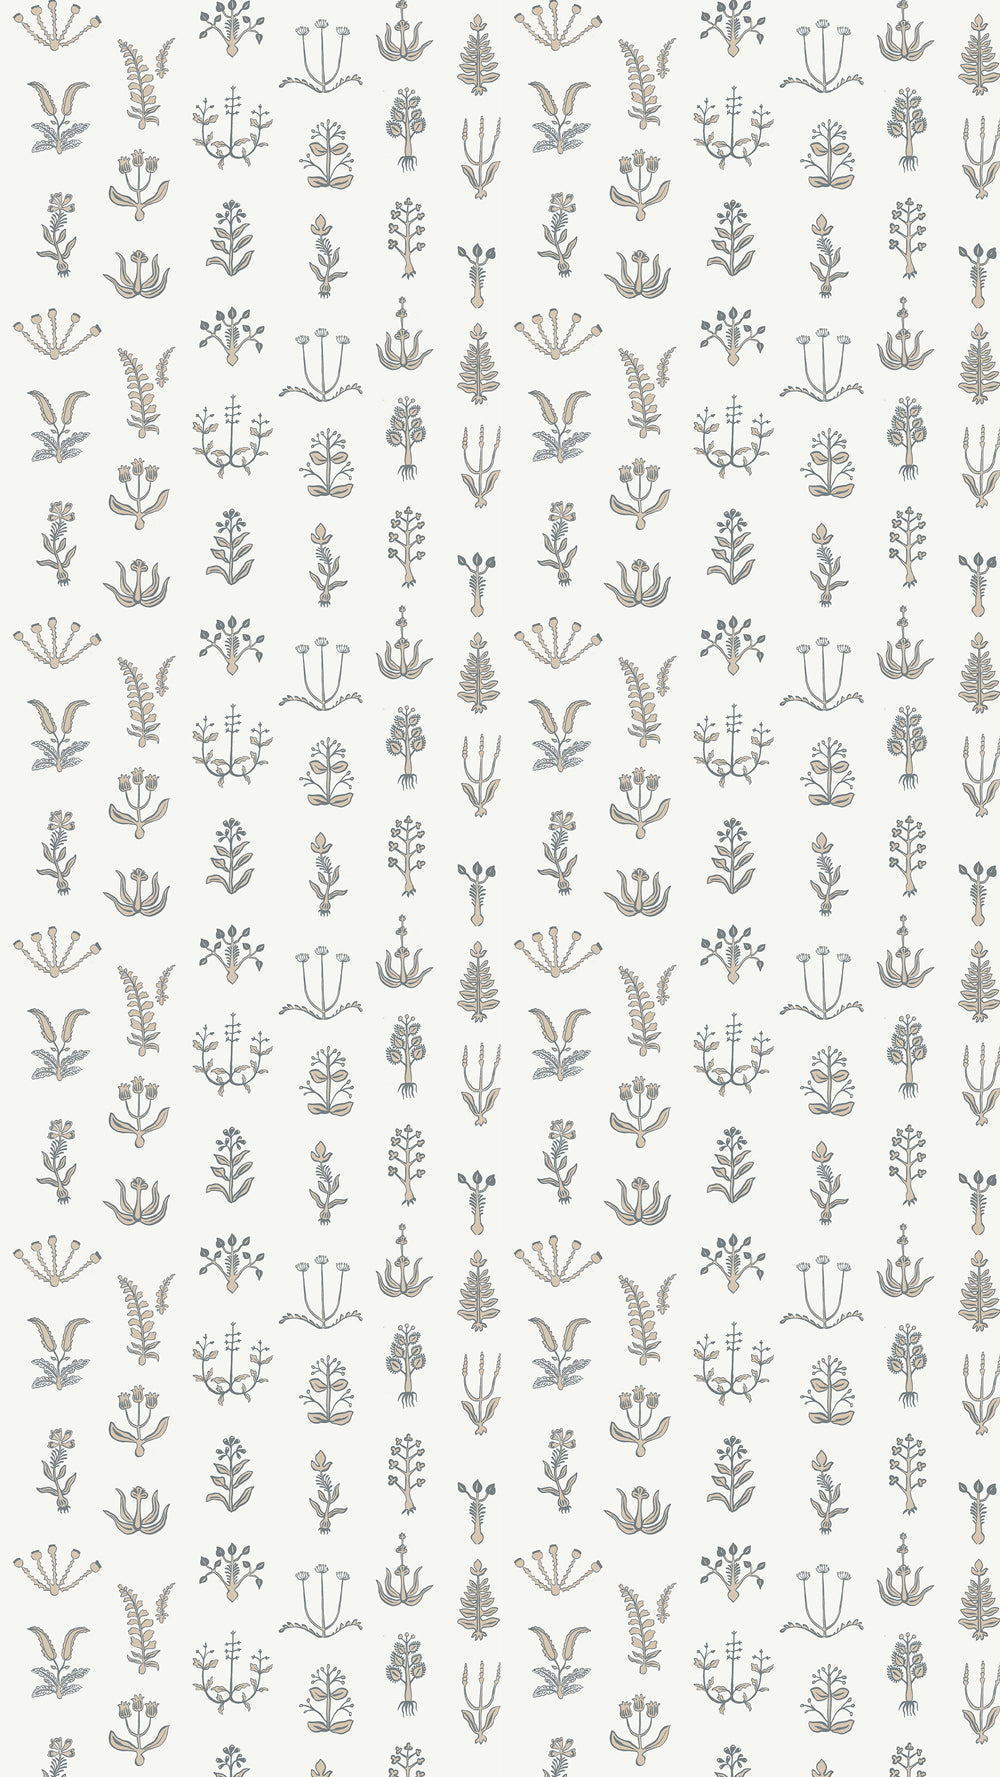 josephine-munsey-floral-spot-wallpaper-bude-blue-cromwell-stone-hilles-white-ditsy-print-traditional-print-organic-floral-pattern-botanical